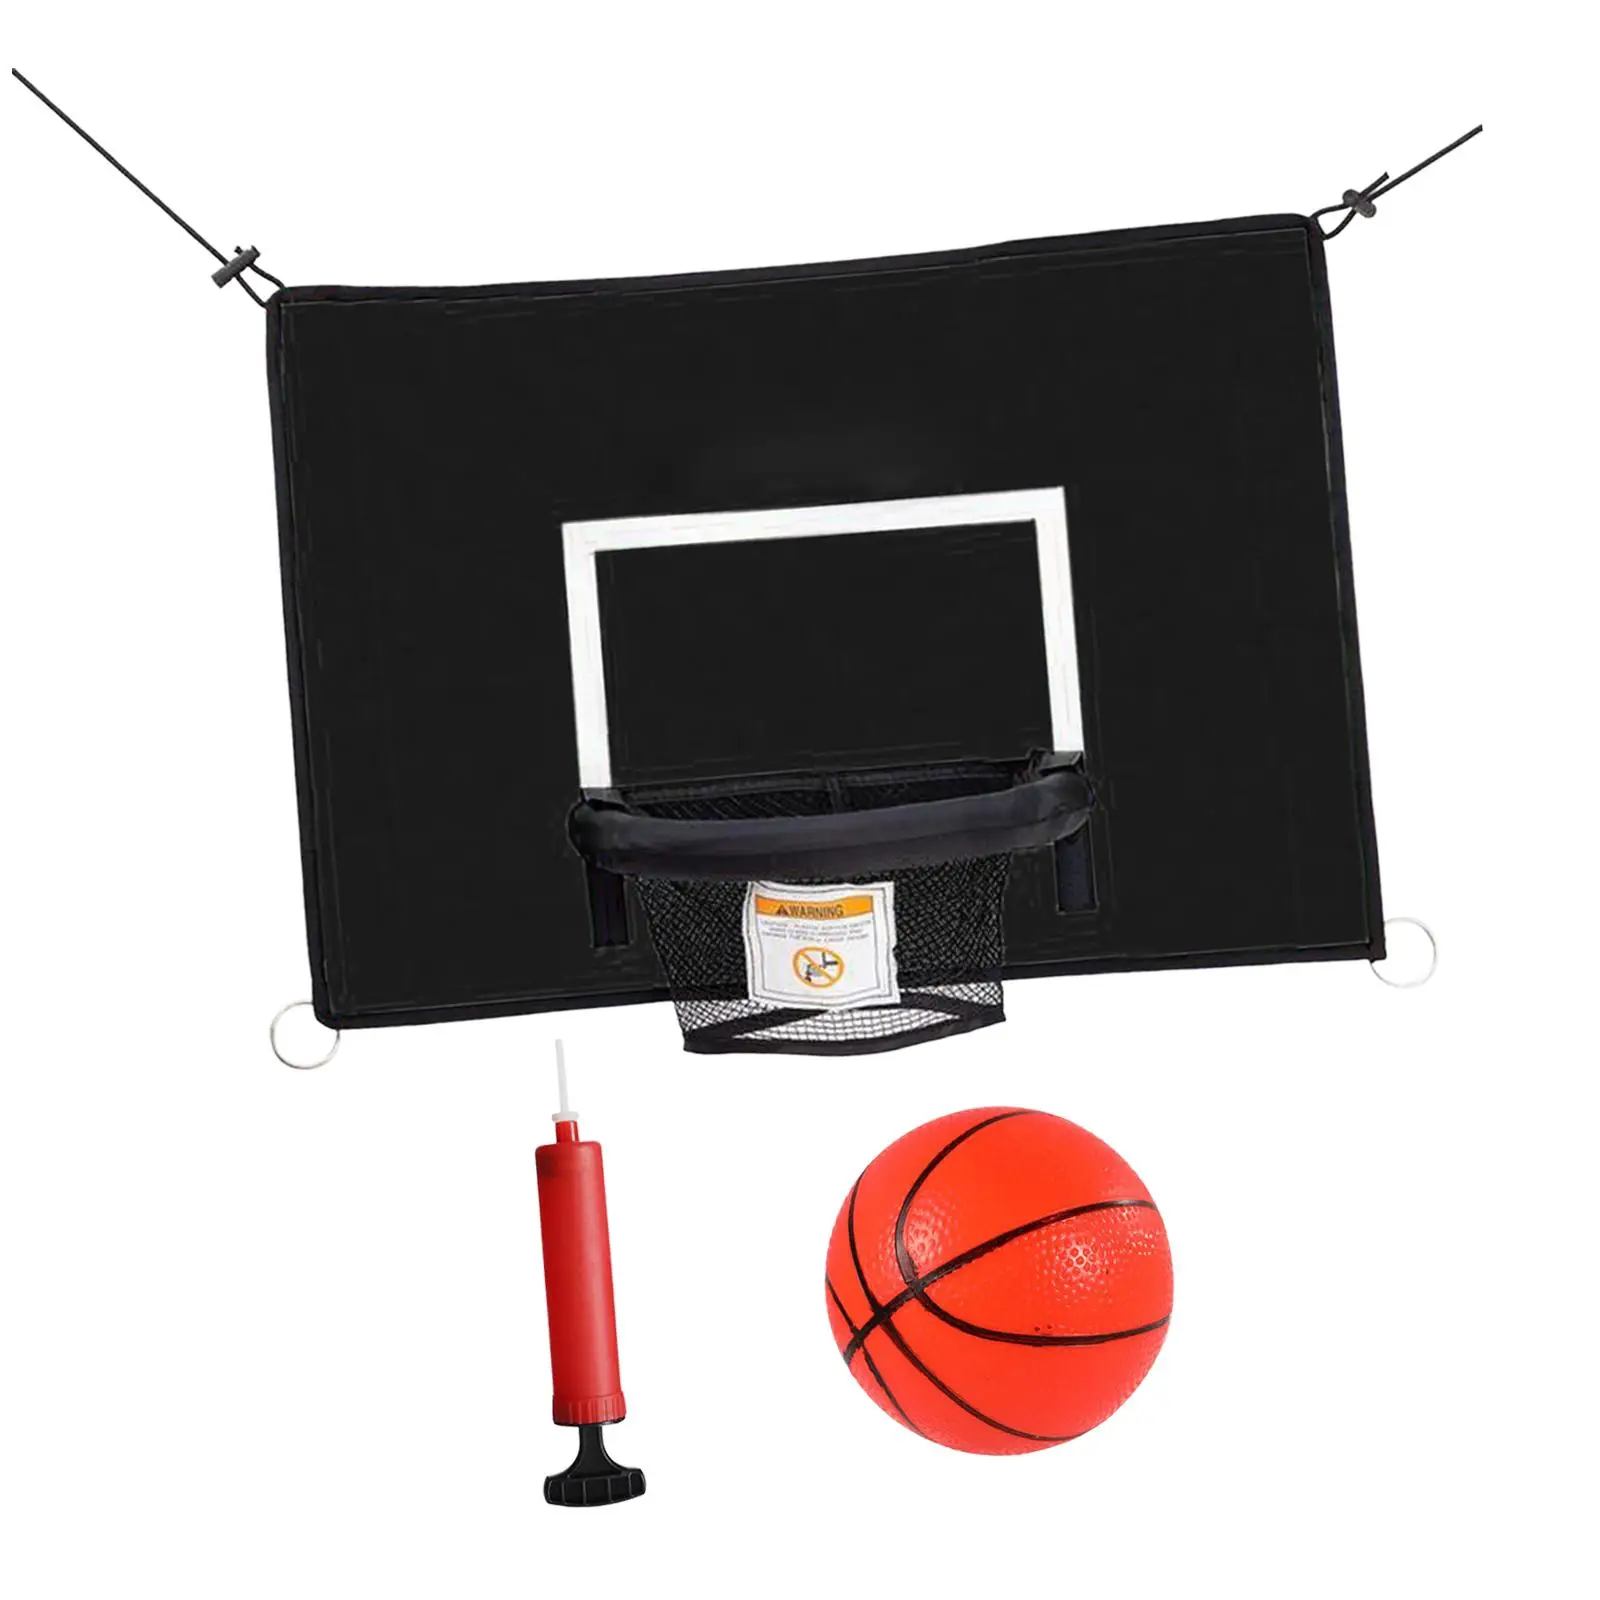 Mini Trampoline Basketball Hoop for Kids Outdoor Waterproof Universal Trampoline Accessory for All Ages Garden Basketball Goal